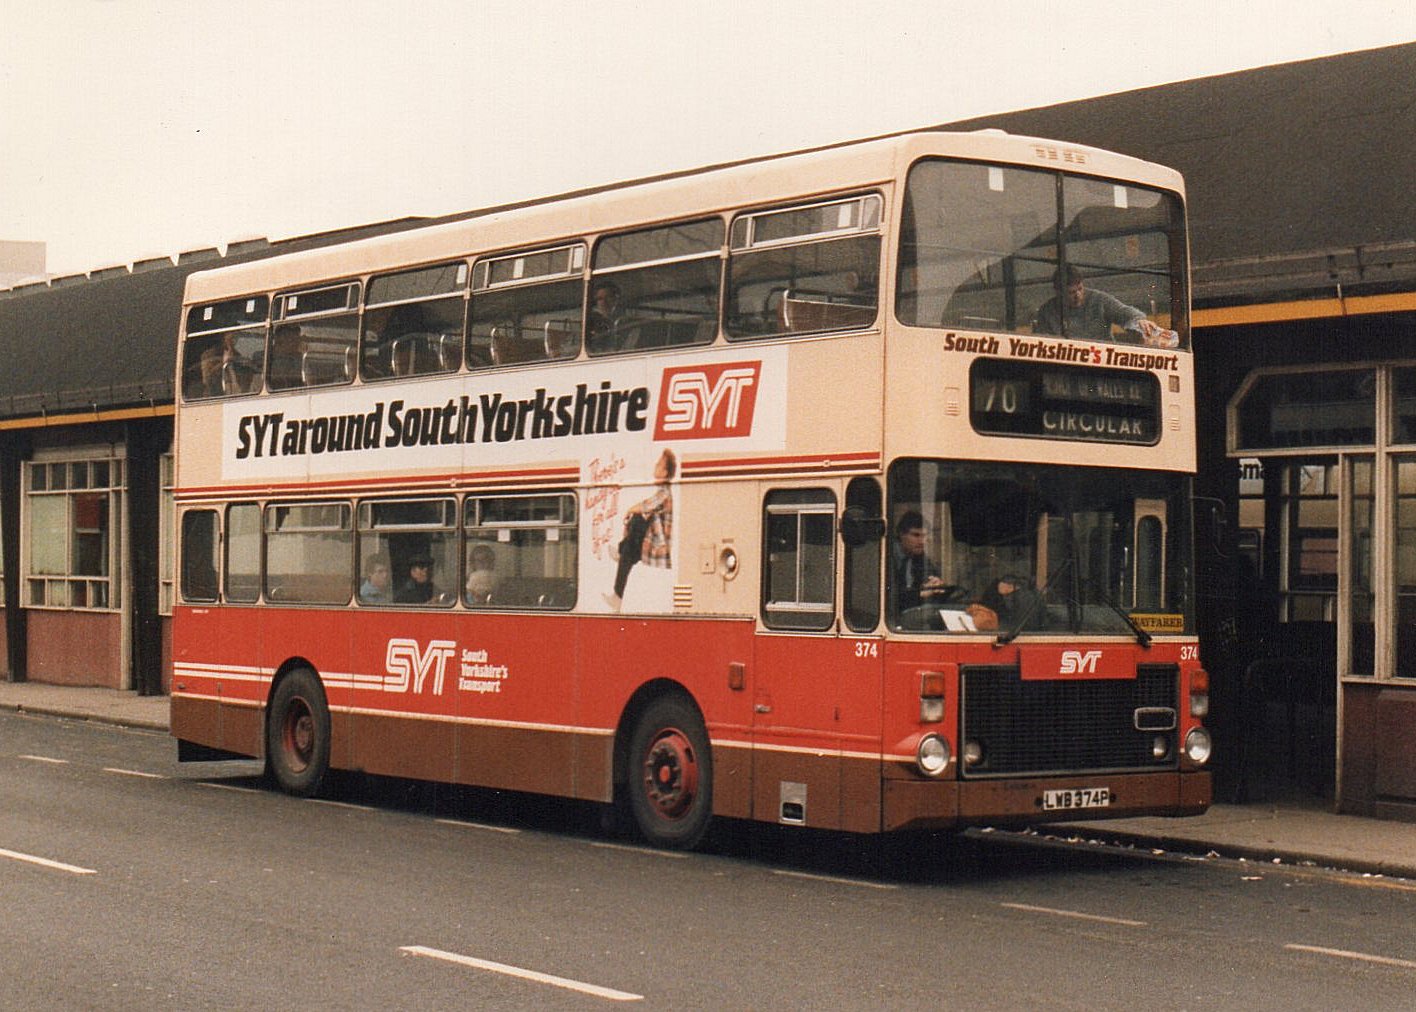 The only Ailsa to receive full SYT livery, seen at Sheffield Bus Station, on the 70 service.